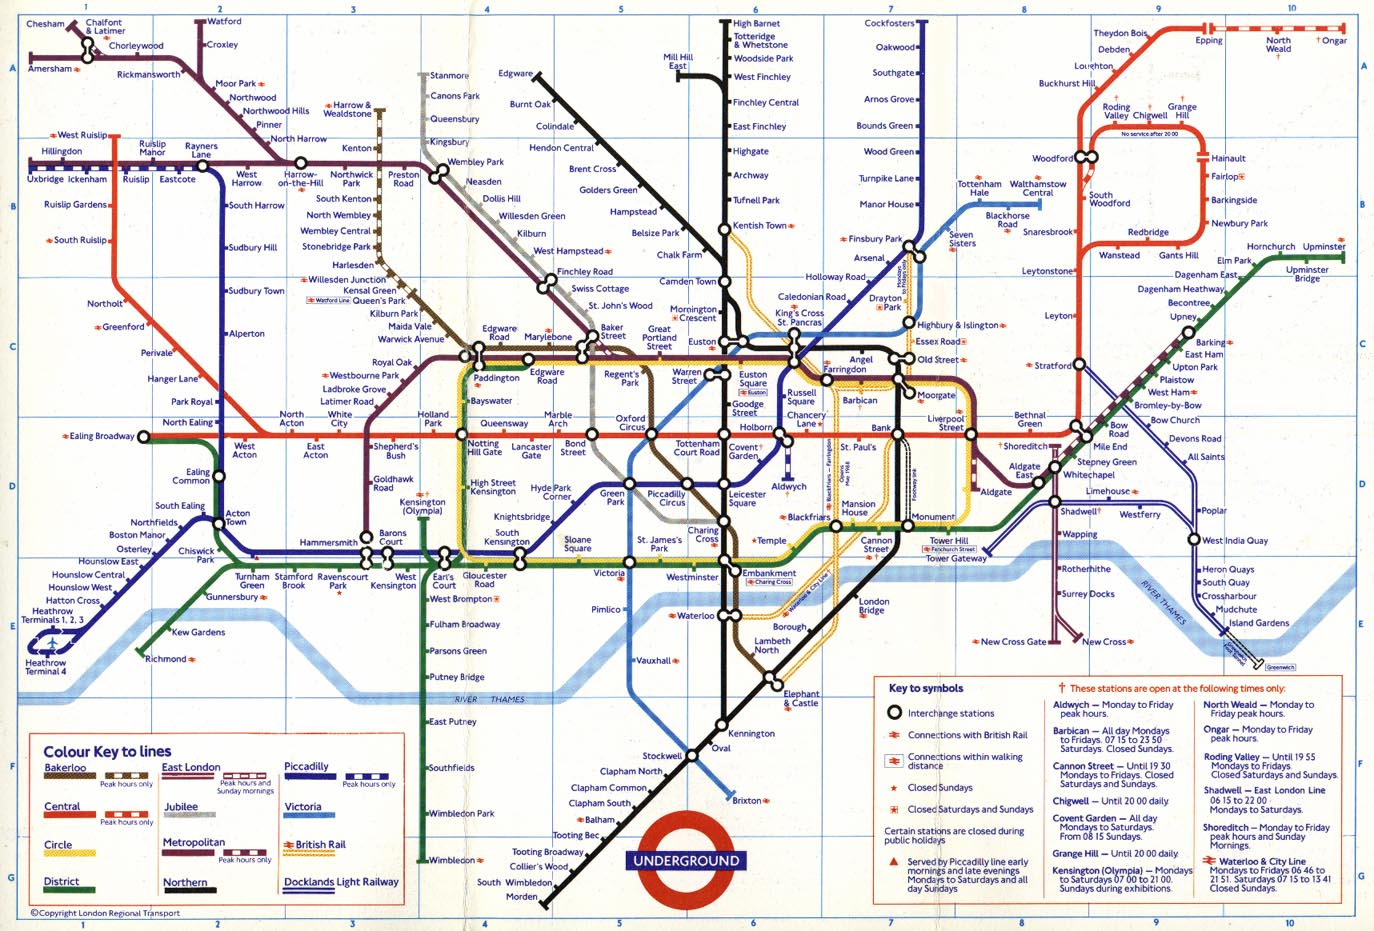 London Underground Map | Fotolip.com Rich image and wallpaper